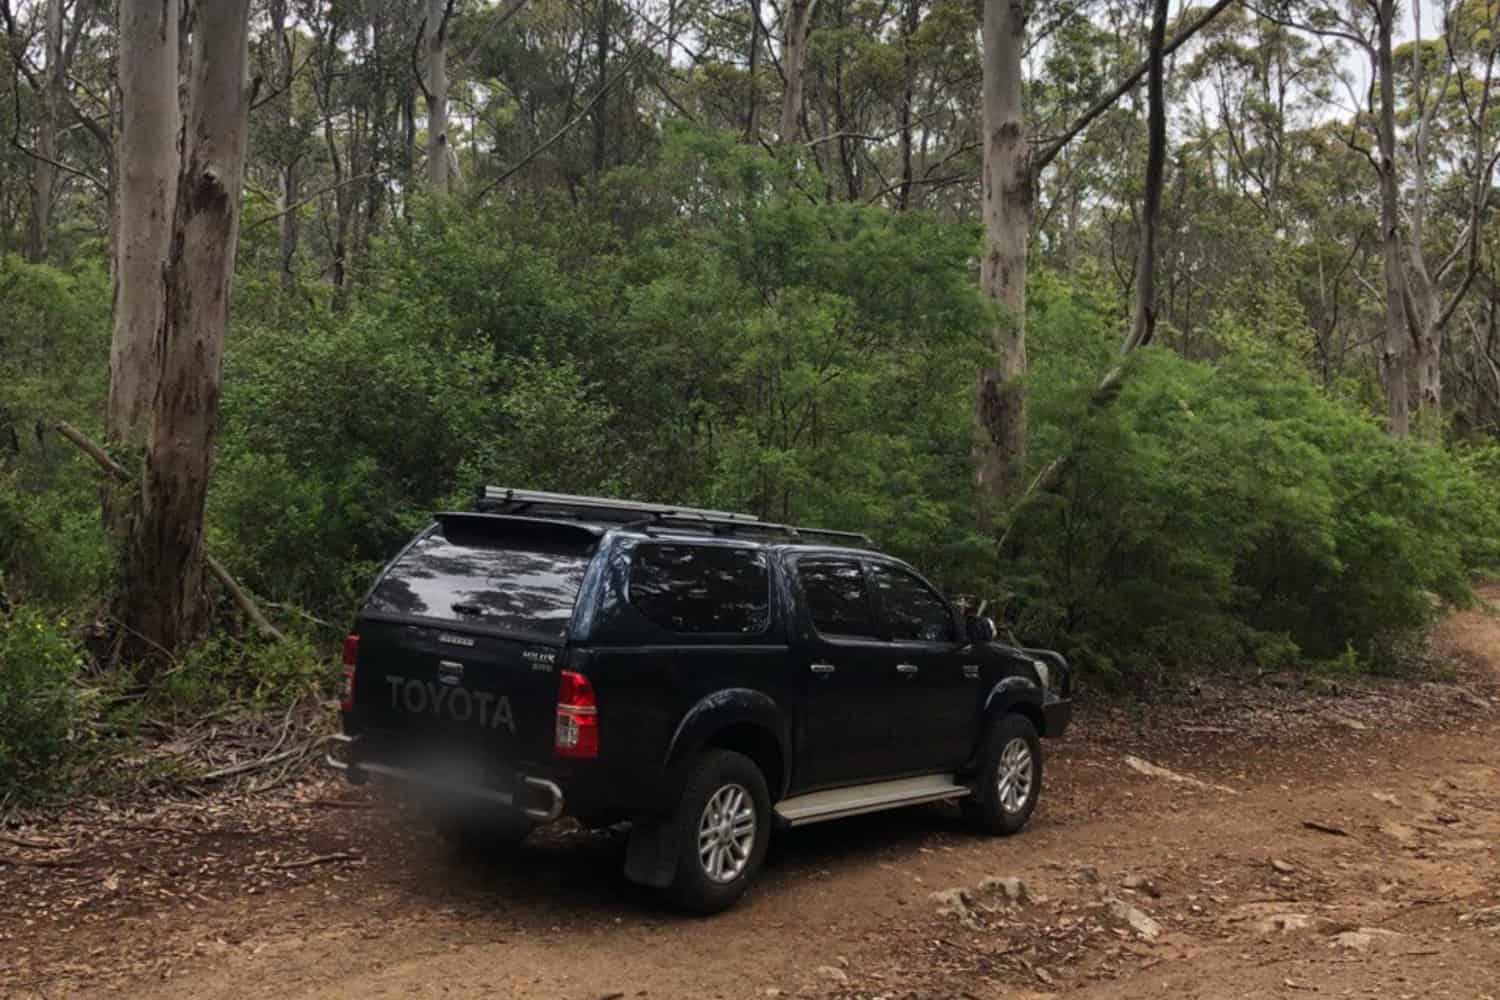 A black Toyota SUV parked on a dirt road in the dense bushland of Margaret River, indicating an adventurous excursion into the natural wilderness.